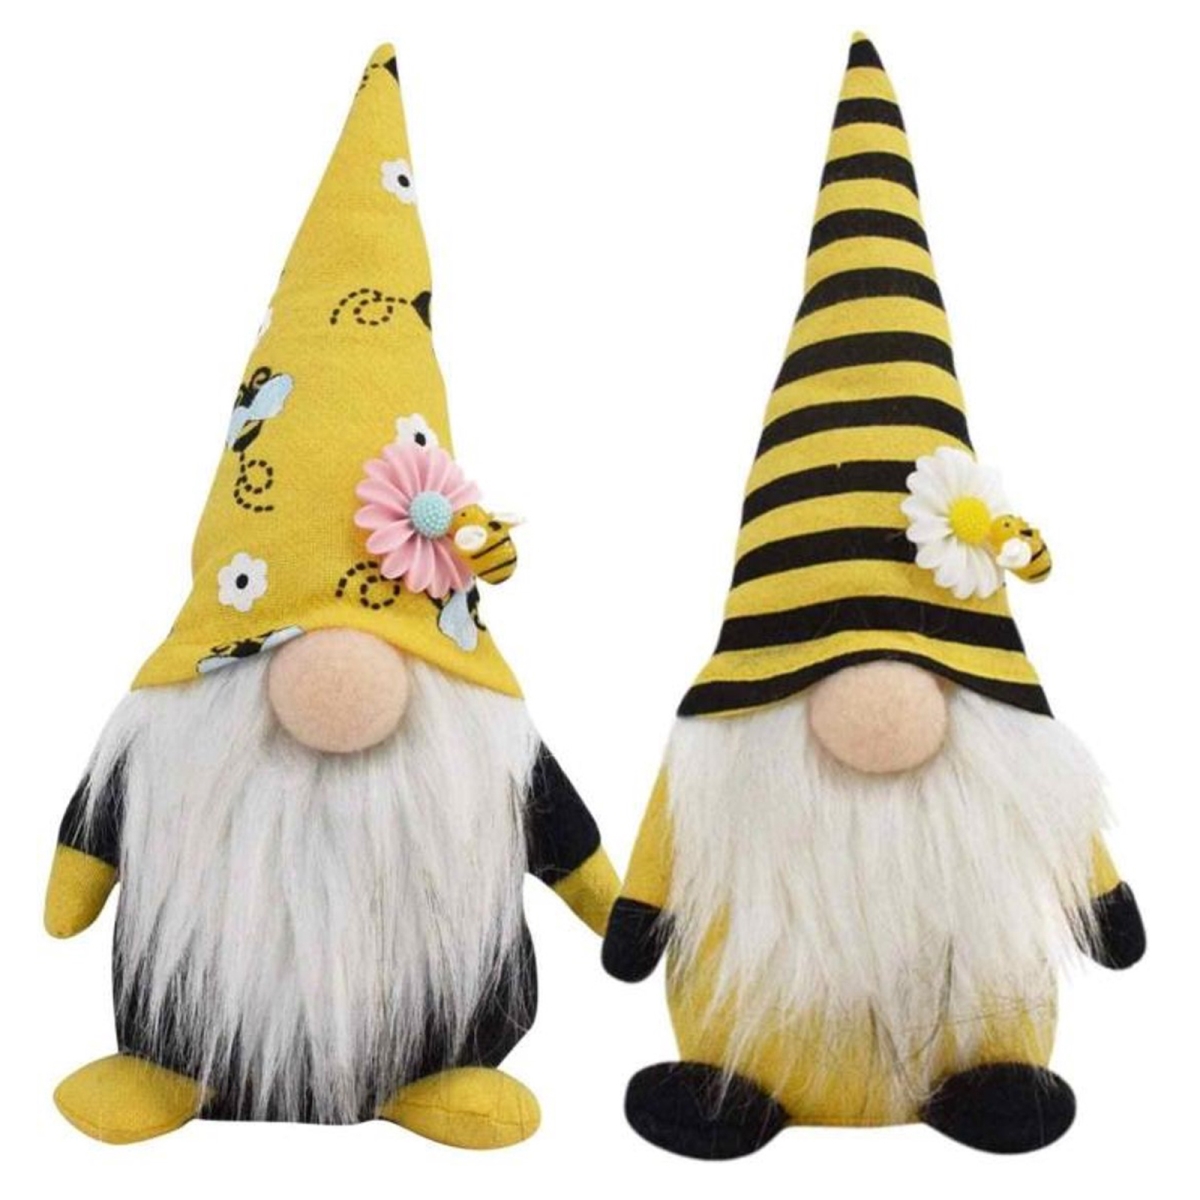 Picture of Santas Workshop 10114 8 in. Honey Bee Gnomes - Set of 2